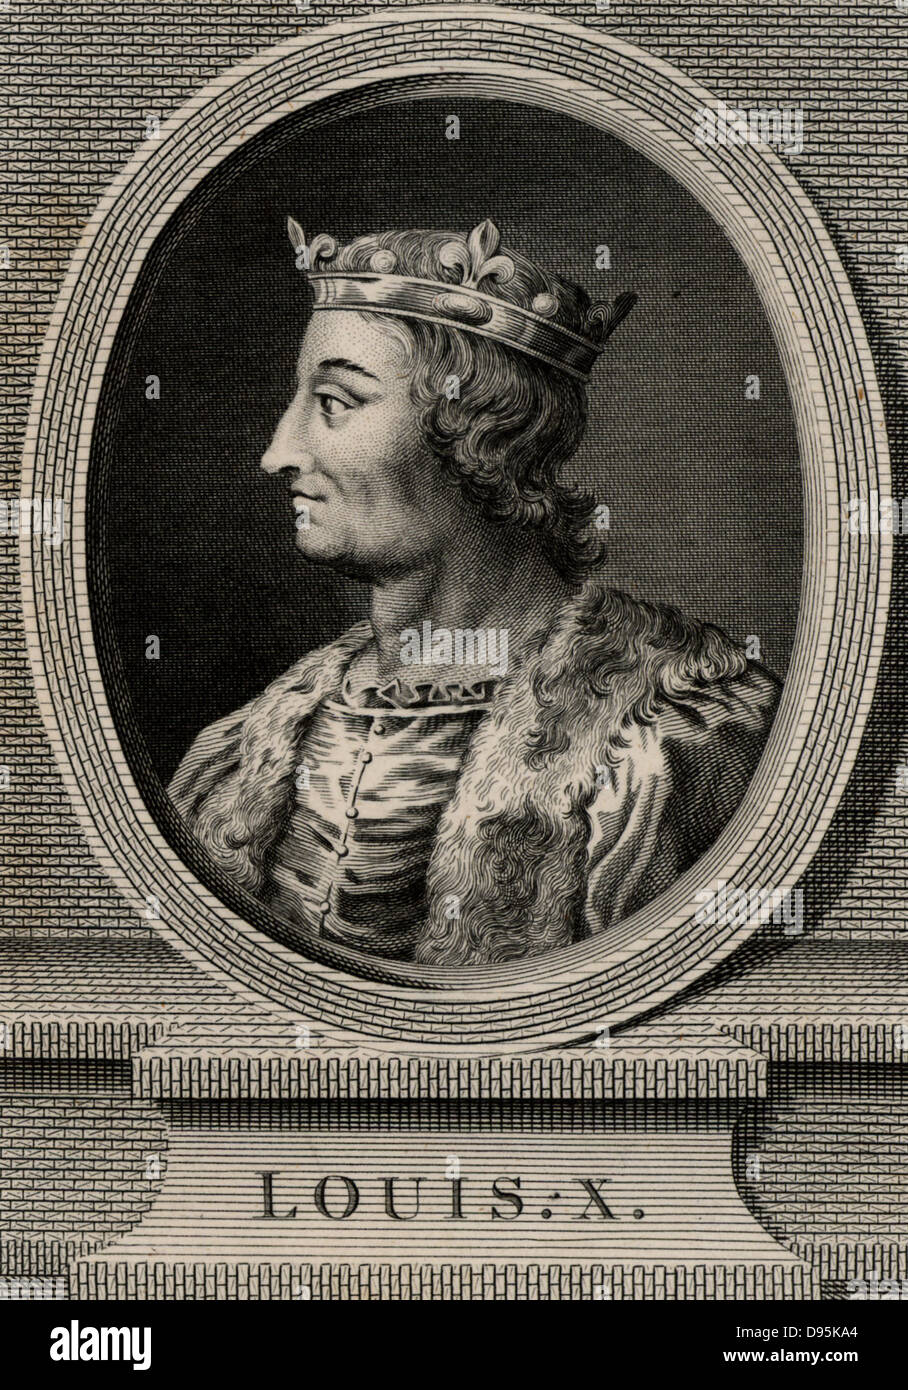 Louis X, the Quarrelsome (1289-1316) a member of the Capetian dynasty. King of Navarre from 1305 and  king of France from 1314. Copperplate engraving, 1793. Stock Photo